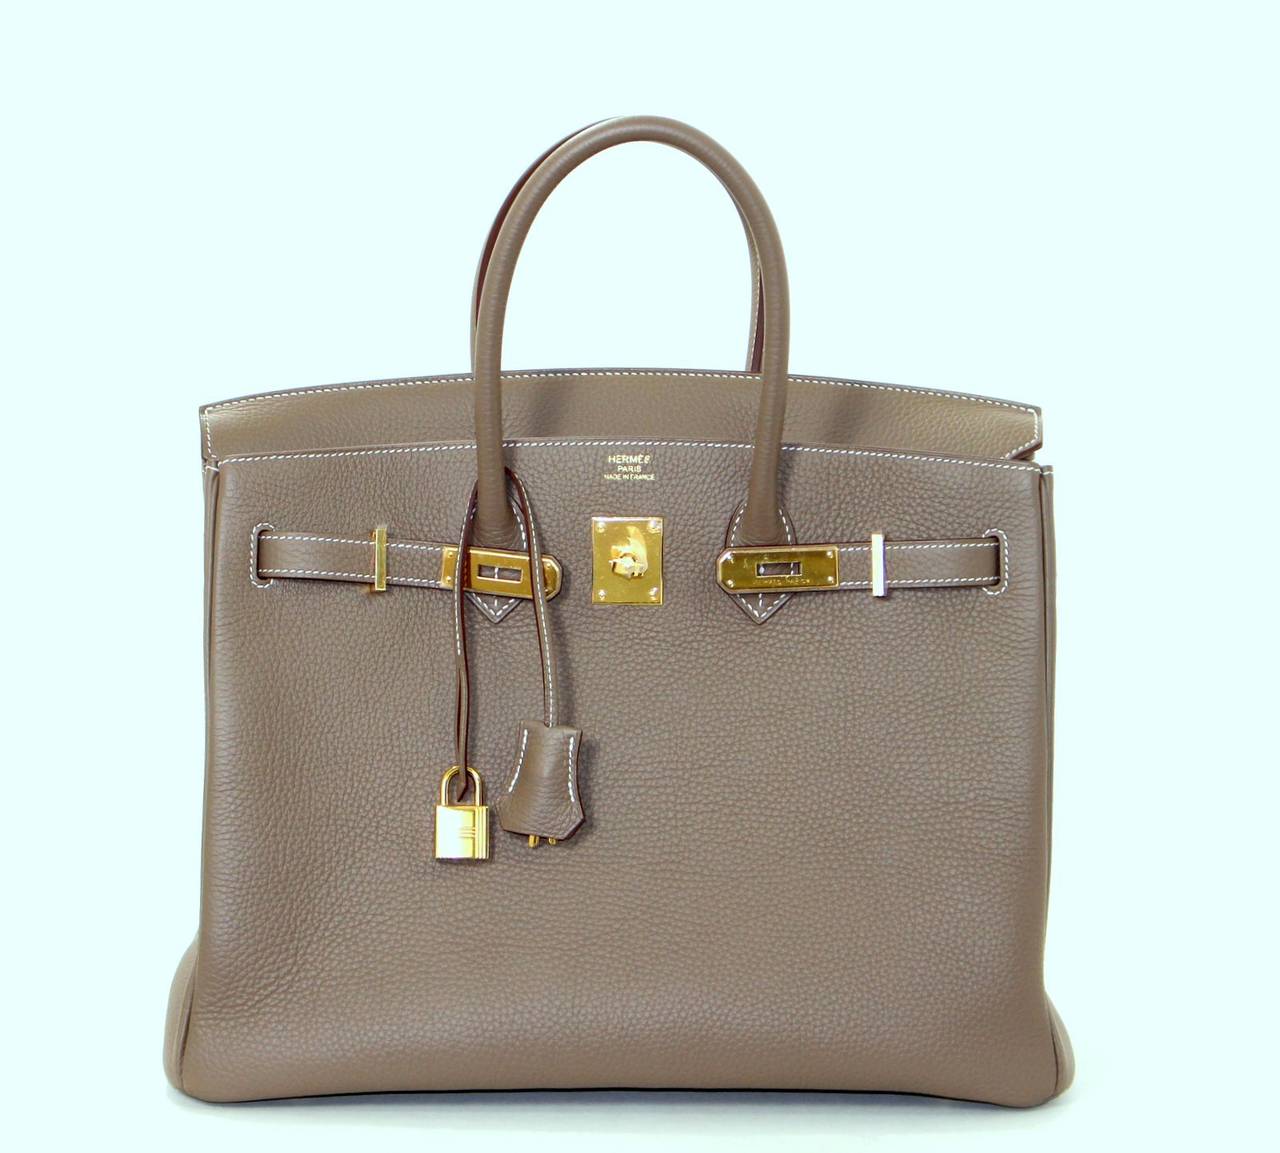 Women's HERMES Etoupe Clemence Birkin Bag- Taupe Color with Gold HW 35 cm